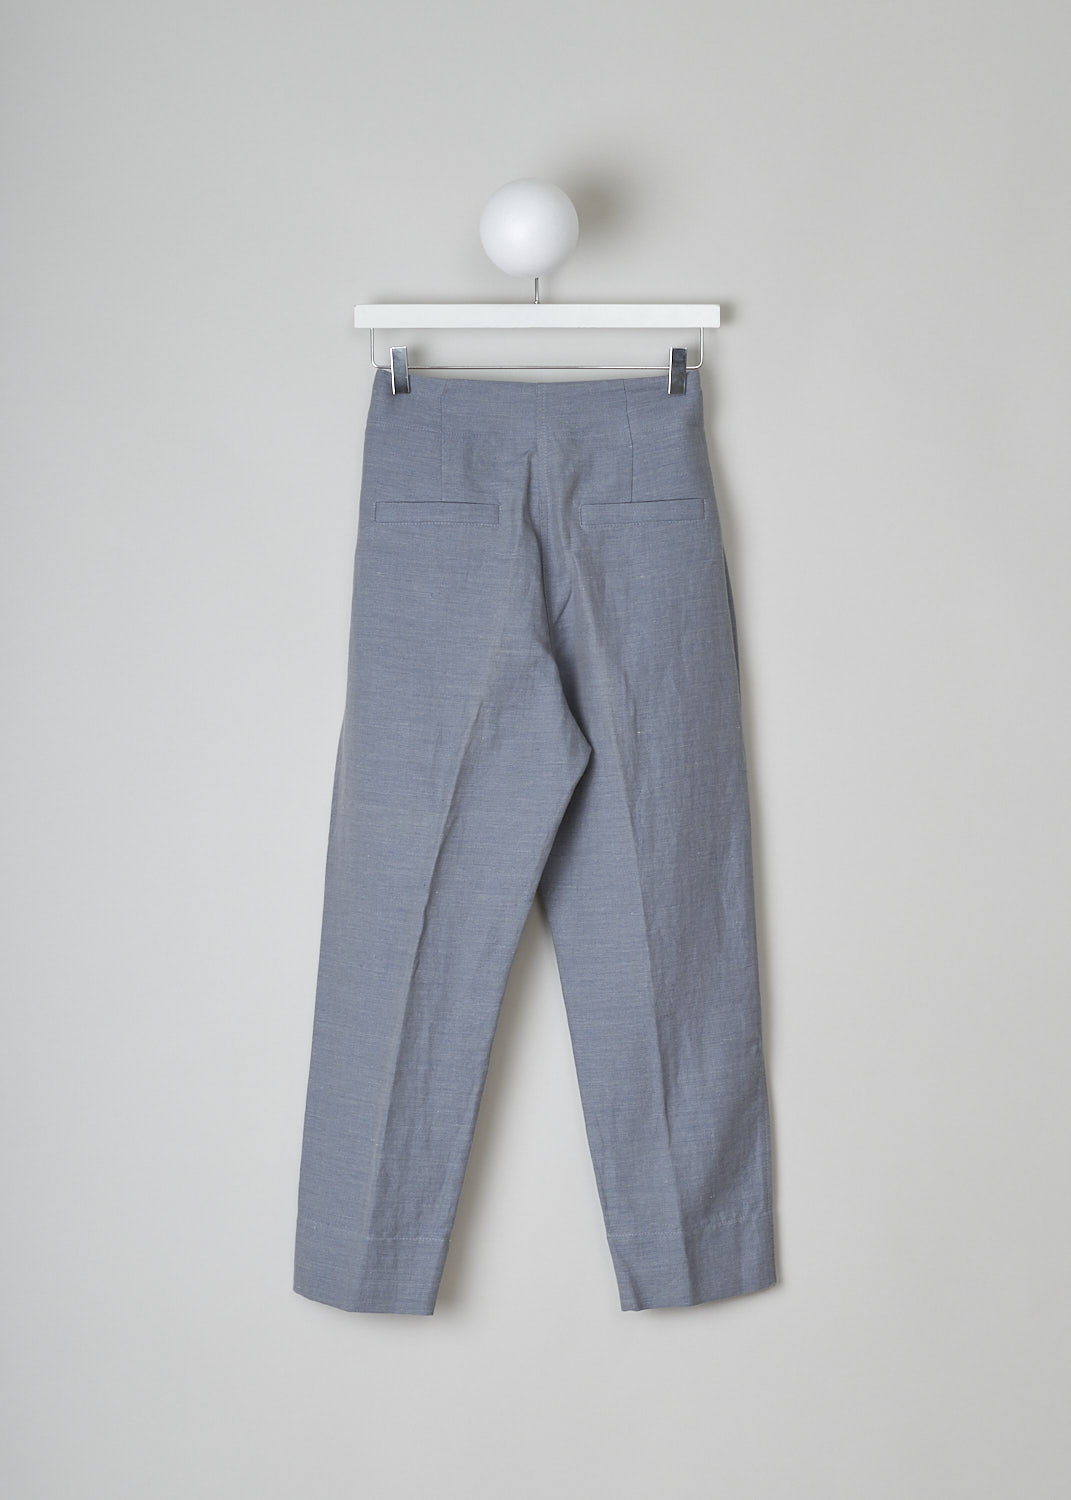 BRUNELLO CUCINELLI, HIGH-WAISTED BLUE HERRINGBONE PANTS, MF553P6596_C7148, Blue, Back, These high-waisted blue herringbone pants have a broad waistband with a fabric belt attached to it. The belt has a D-ring buckle. These pants have a concealed clasp and zip closure. In the front, these pants have slanted pockets. The tapered pants legs have a broad hem. In the back, these pants have welt pockets.

